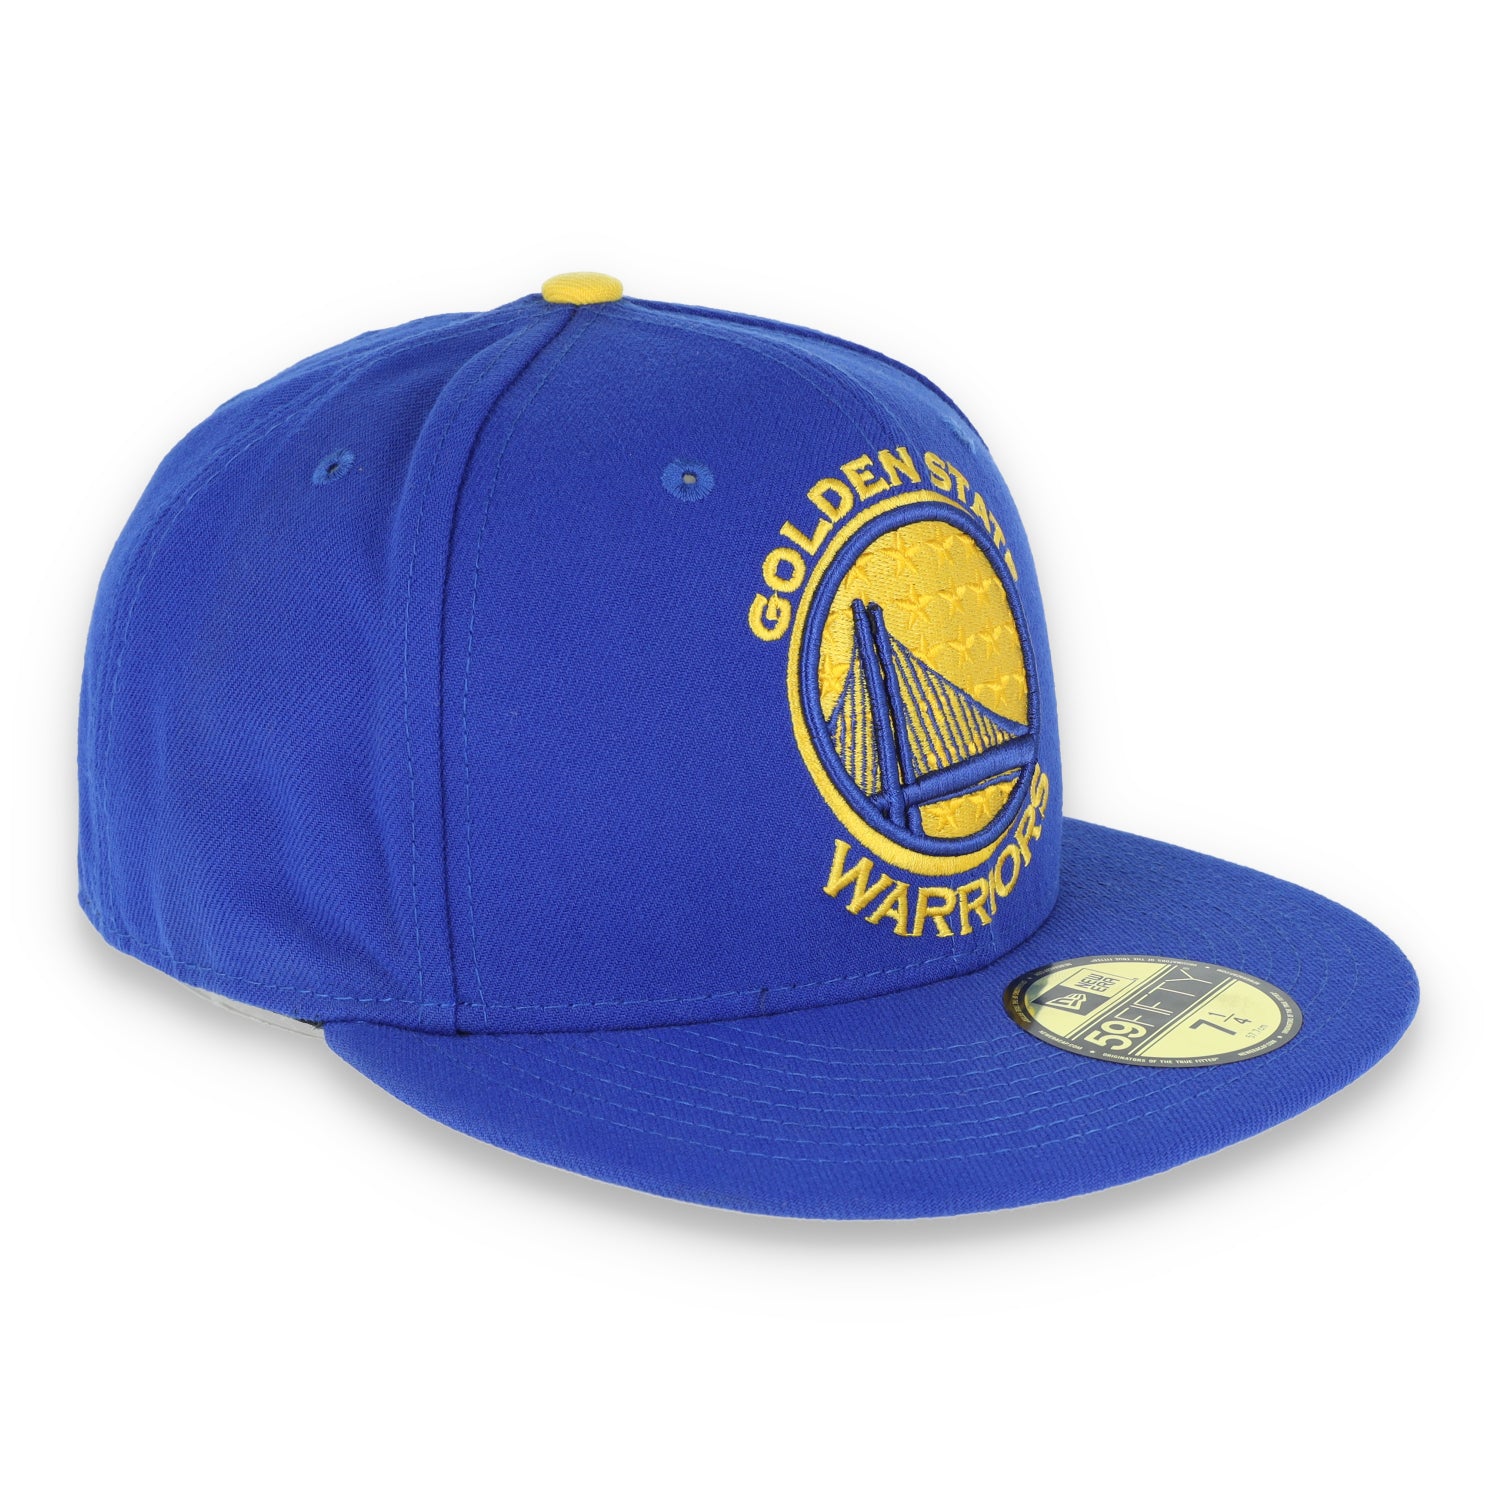 NEW ERA GOLDEN STATE WARRIORS SPLENDOR FILL FIT 59FIFTY FITTED HAT